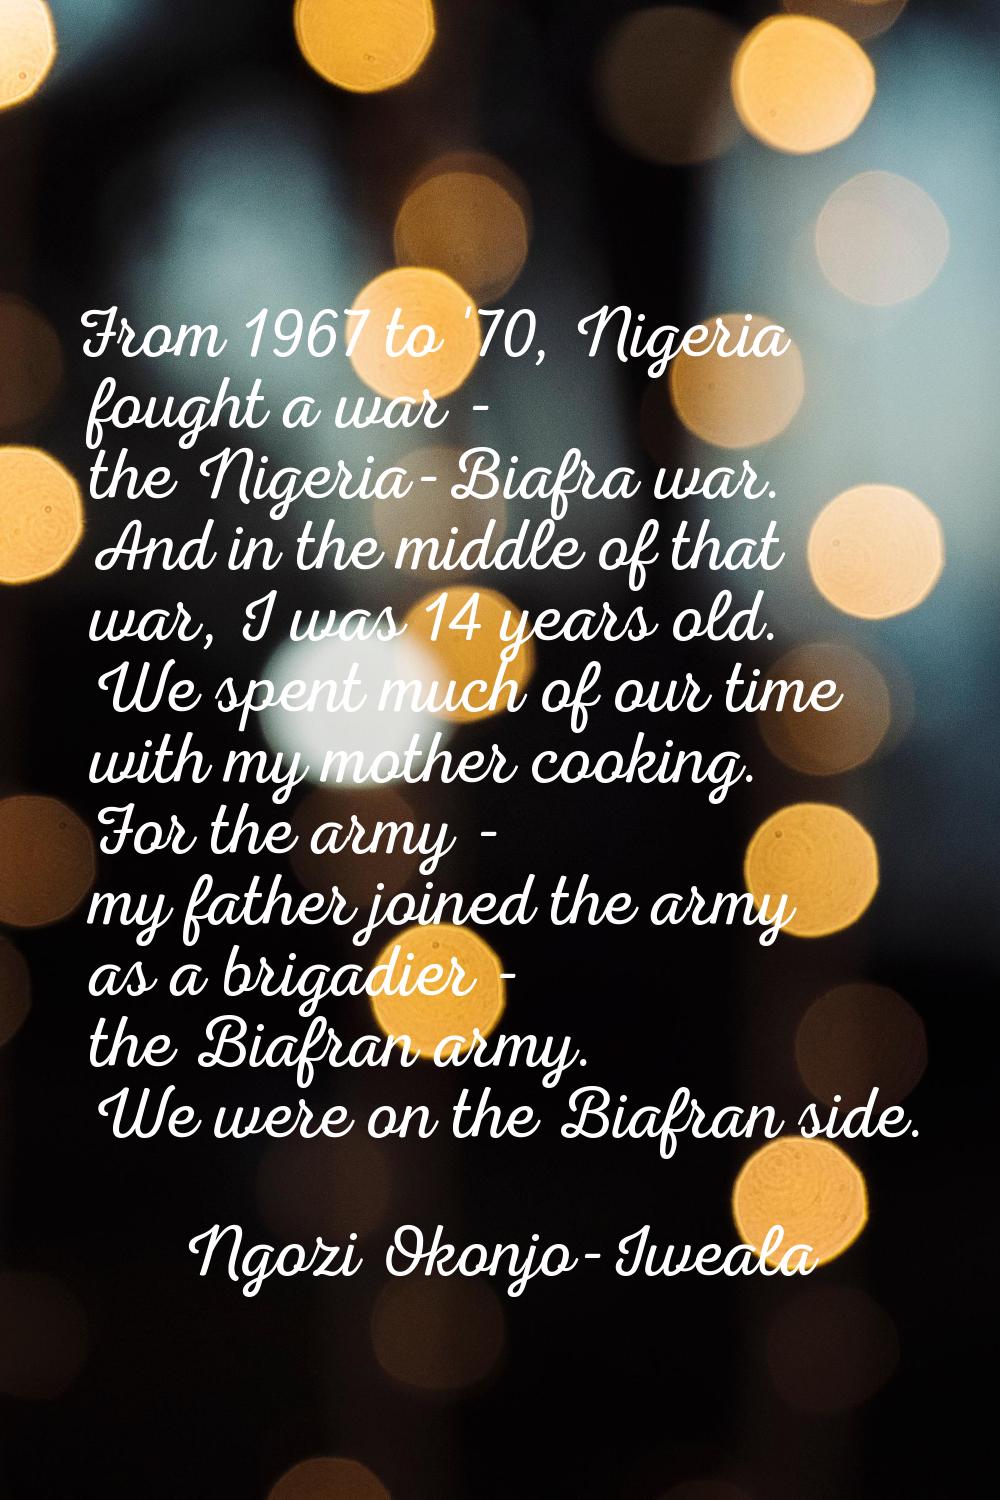 From 1967 to '70, Nigeria fought a war - the Nigeria-Biafra war. And in the middle of that war, I w